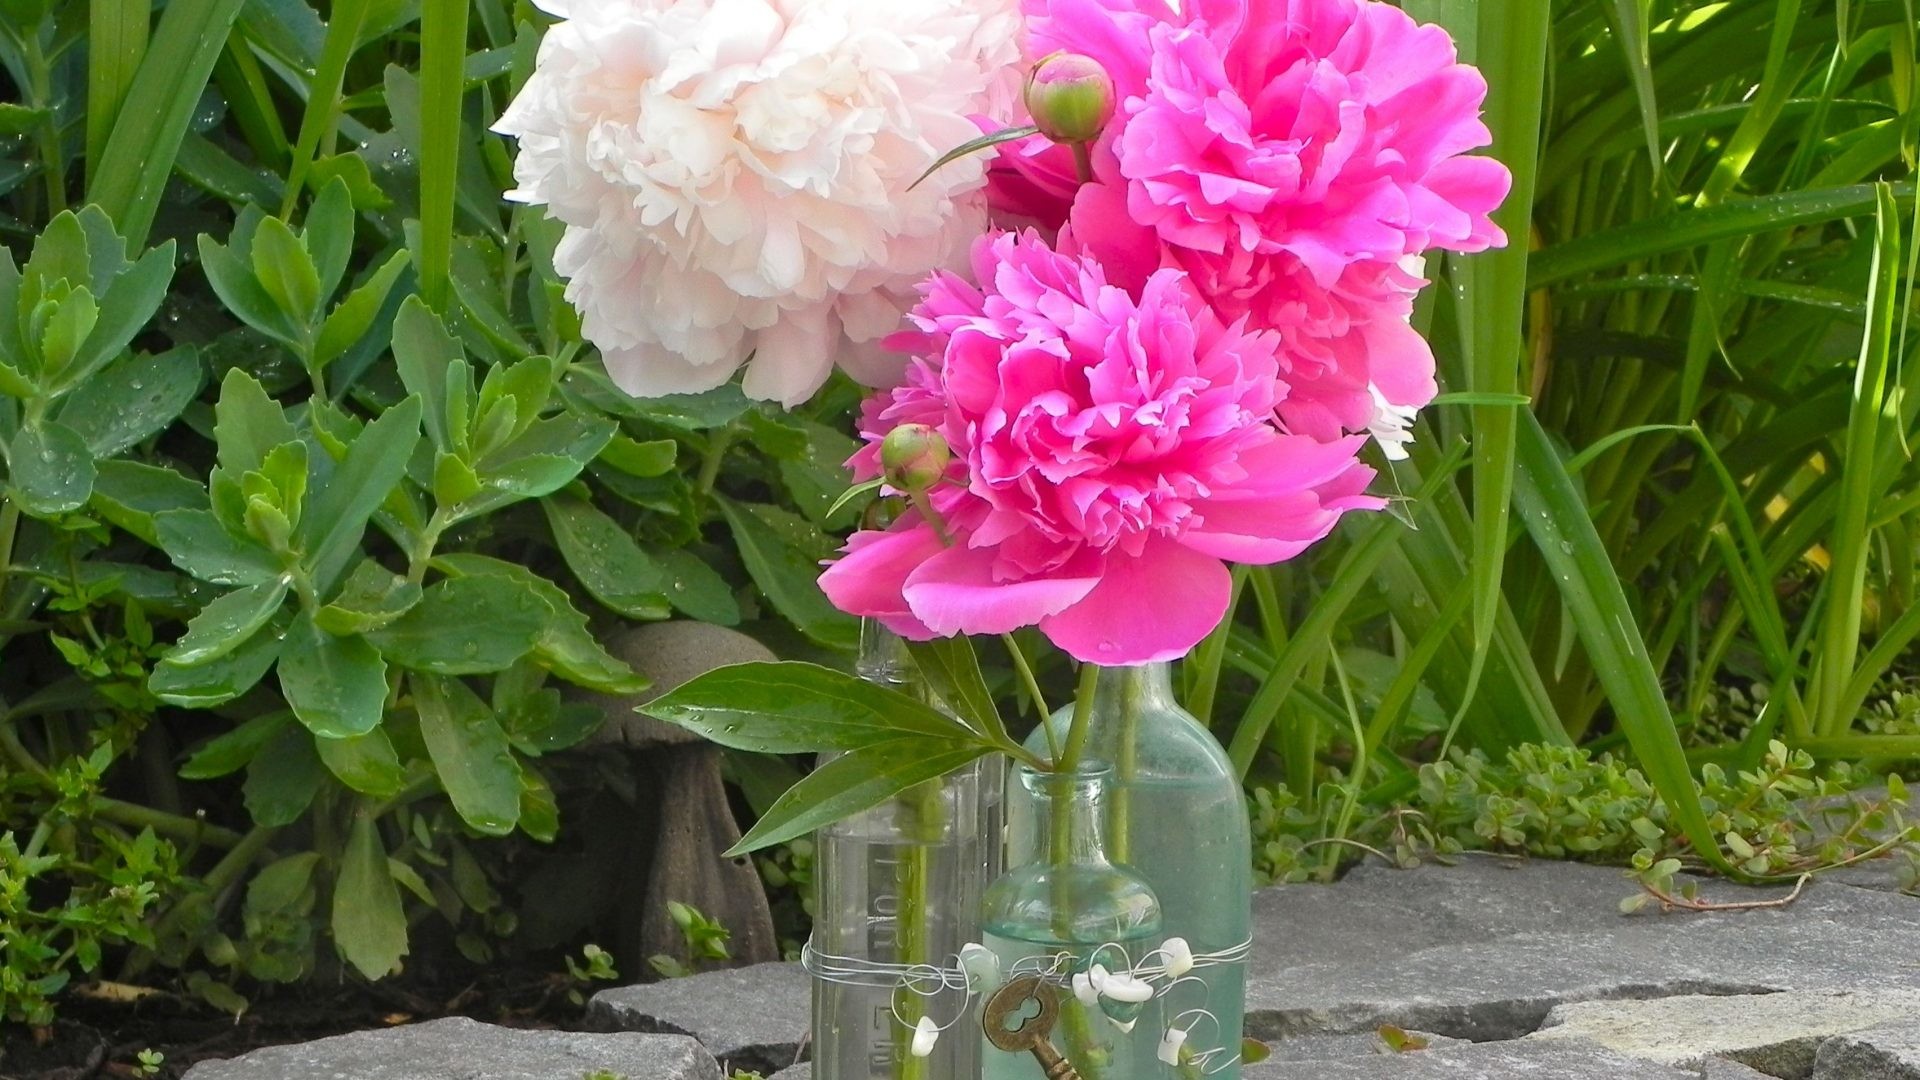 1920x1080 Peonies Tag - Peonies Beautiful Pretty Flowers Forever Bouquets Pink Fresh  Nature Bouquet Bottle Love Green